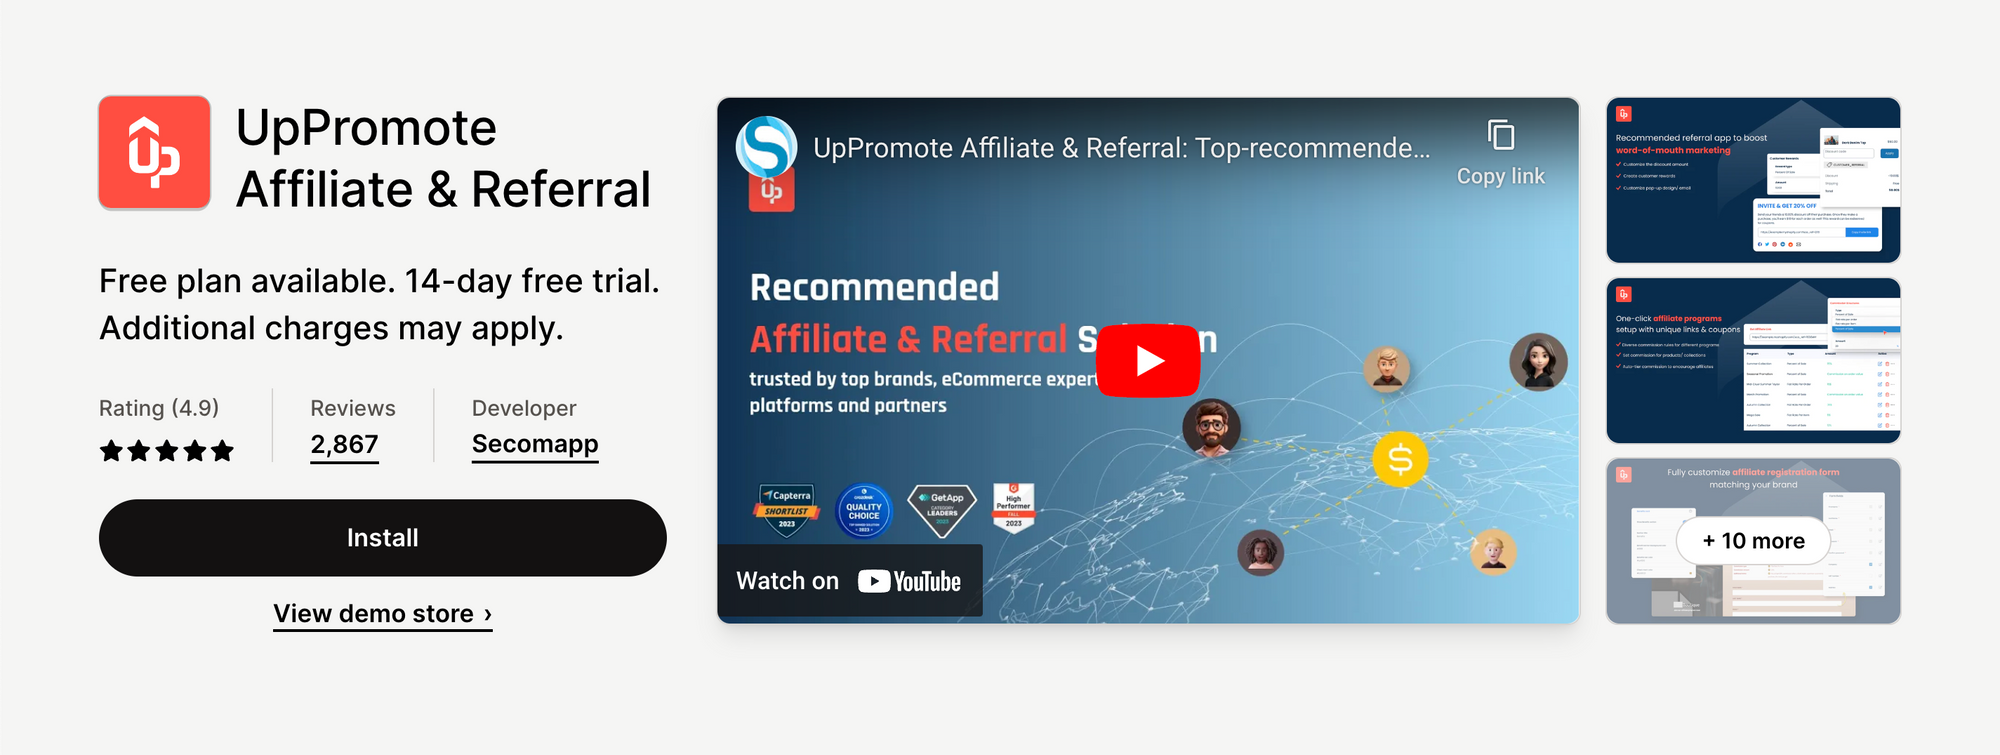 UpPromote Affiliate & Referral Shopify App